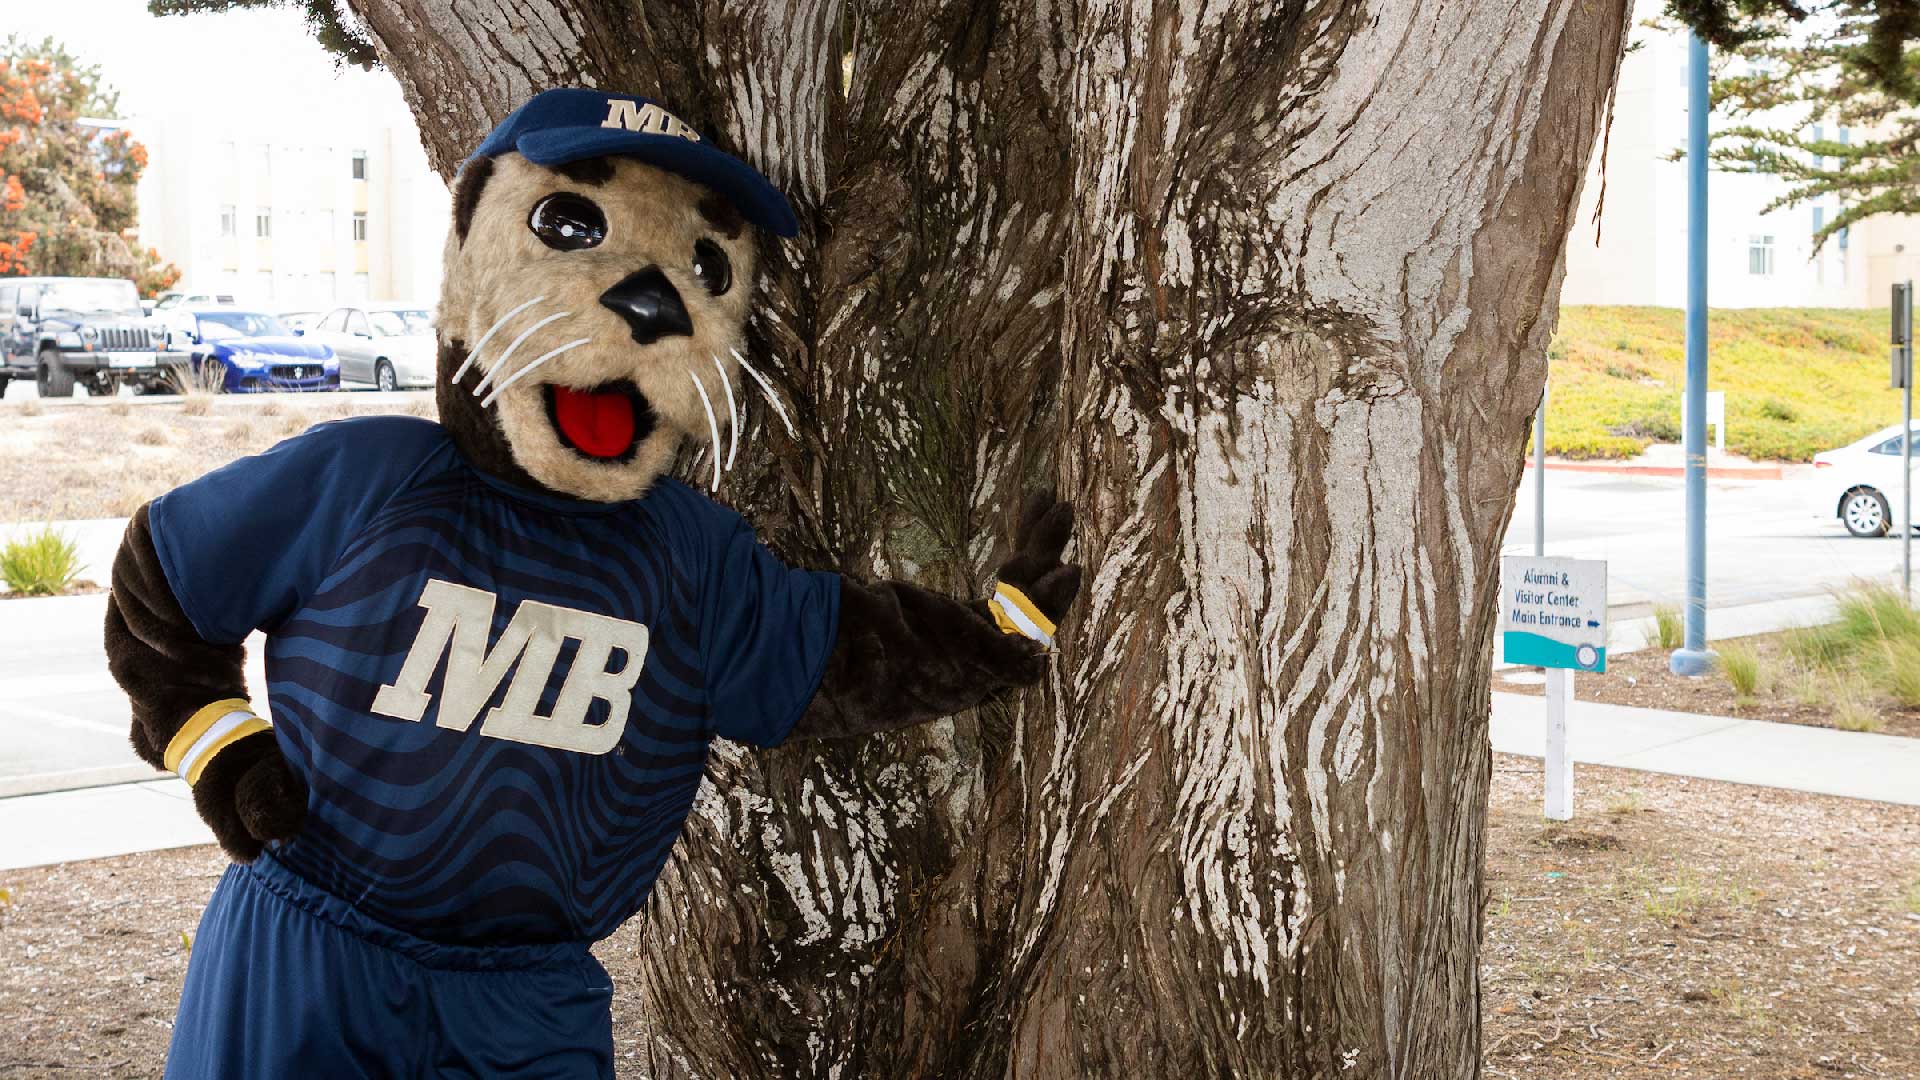 Mascot, Monte Ray by a tree in Main Quad